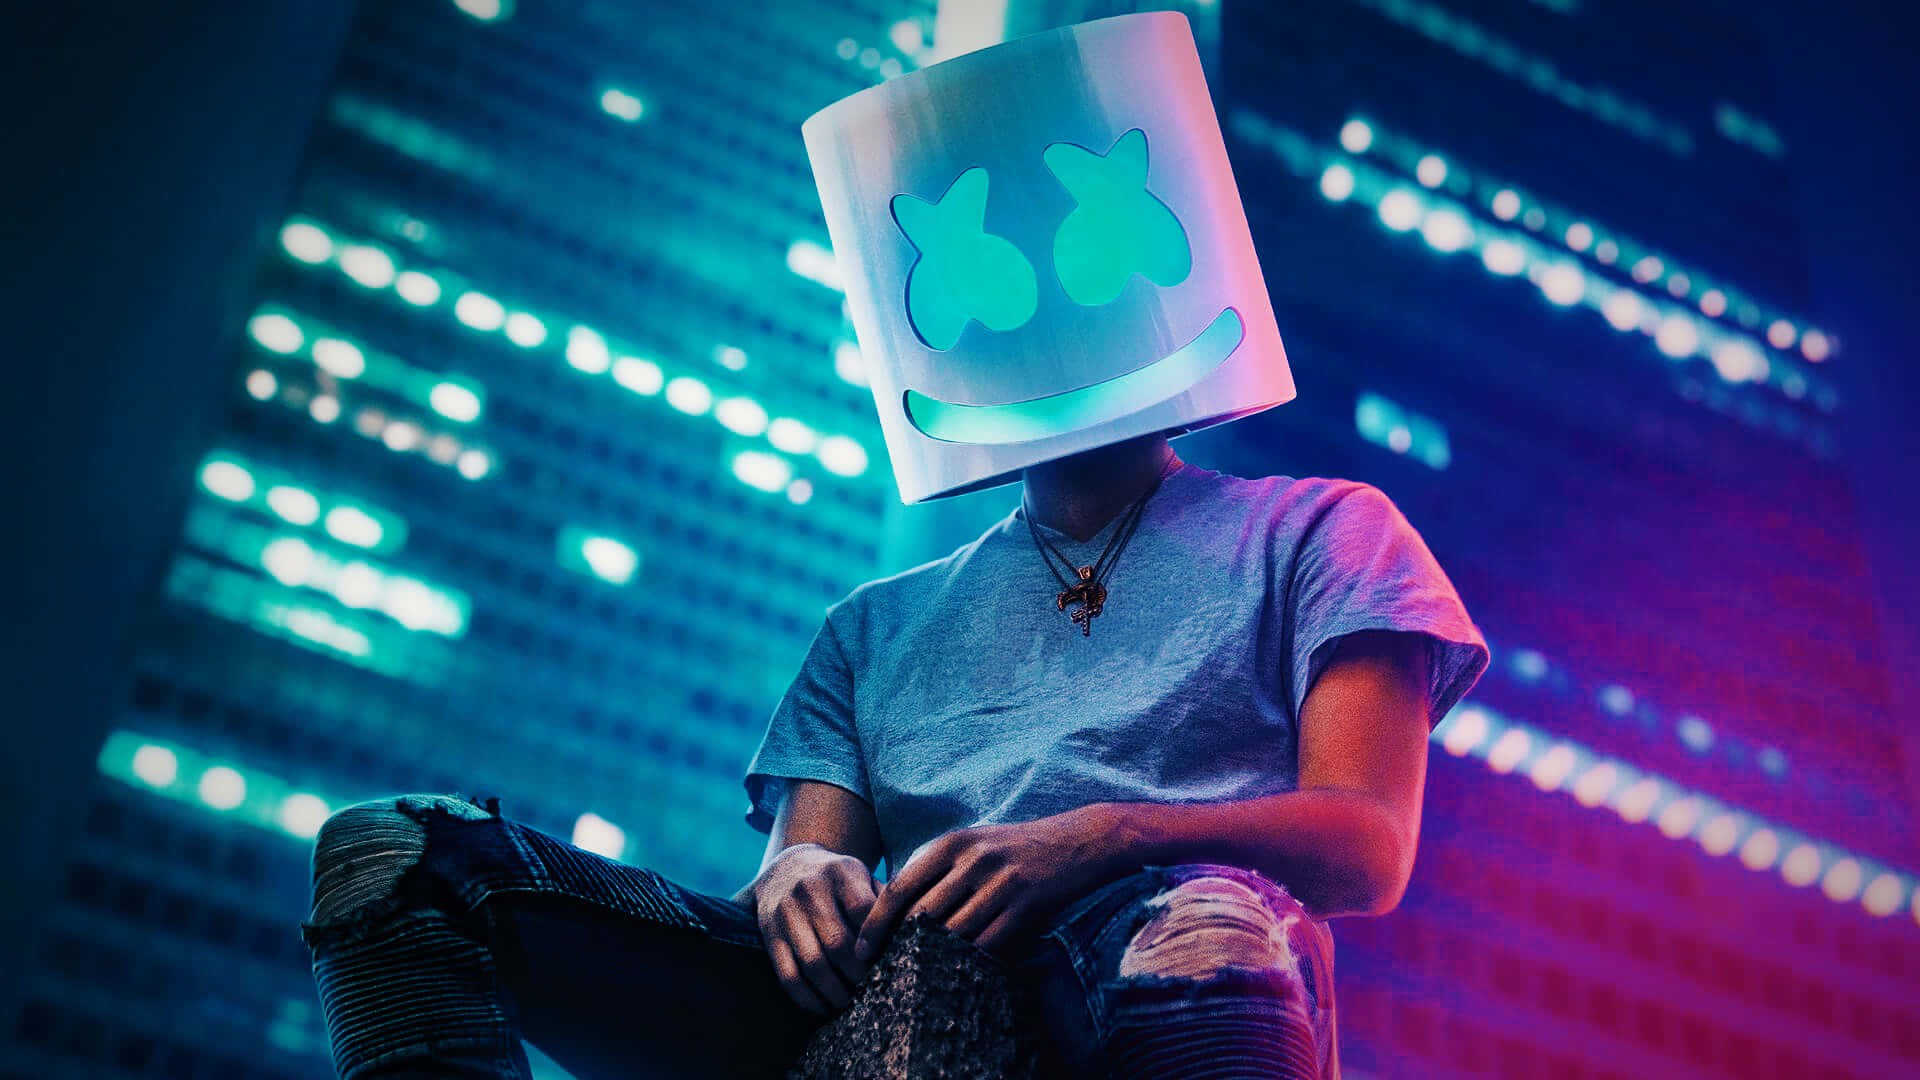 Get lost in the music with Marshmello